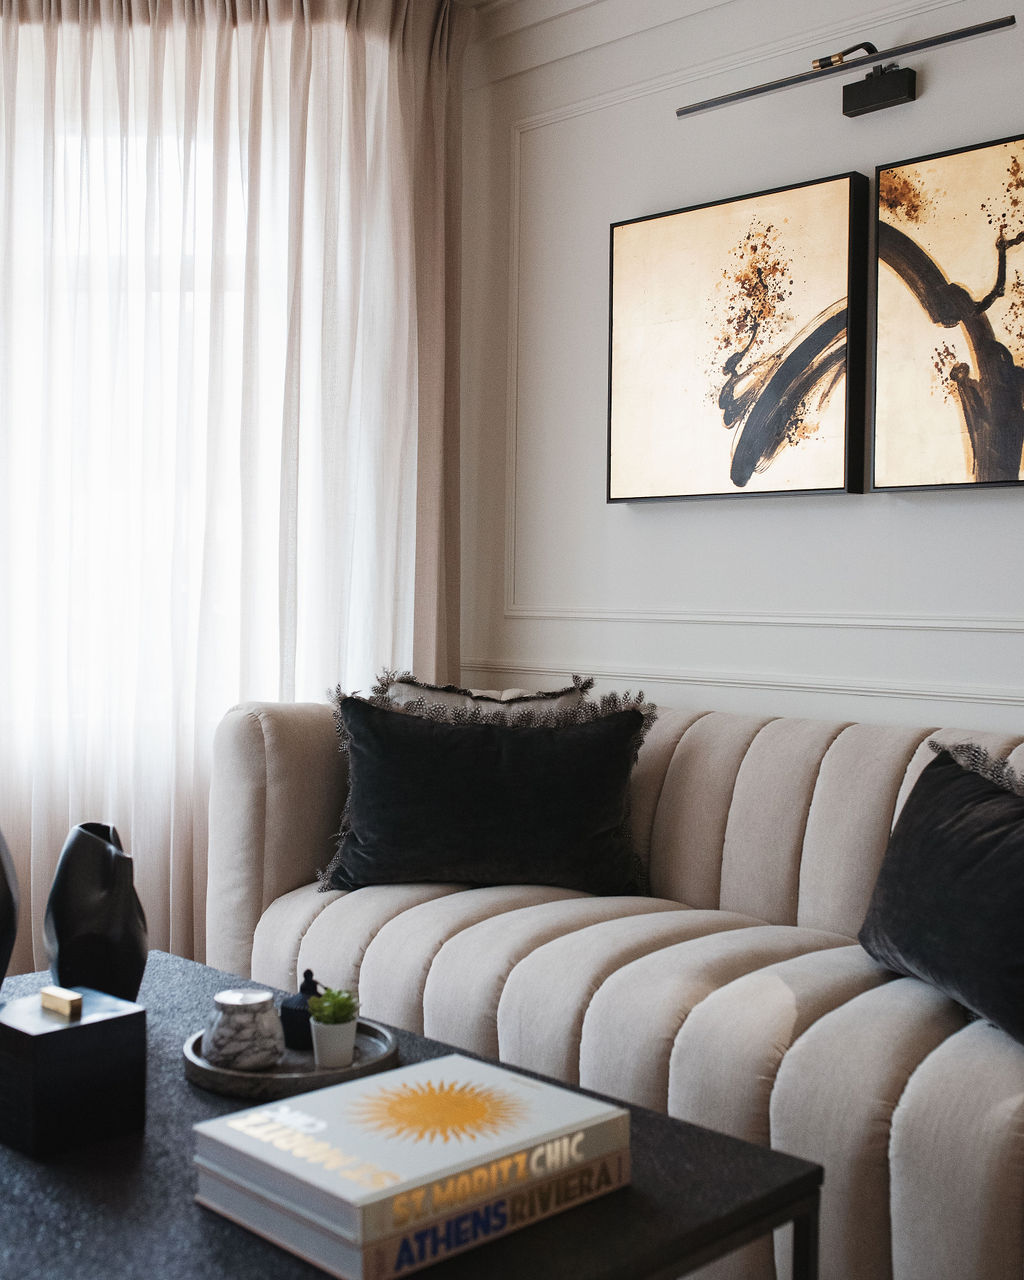 interior design of a lounge with cuff sofa and black coffee table